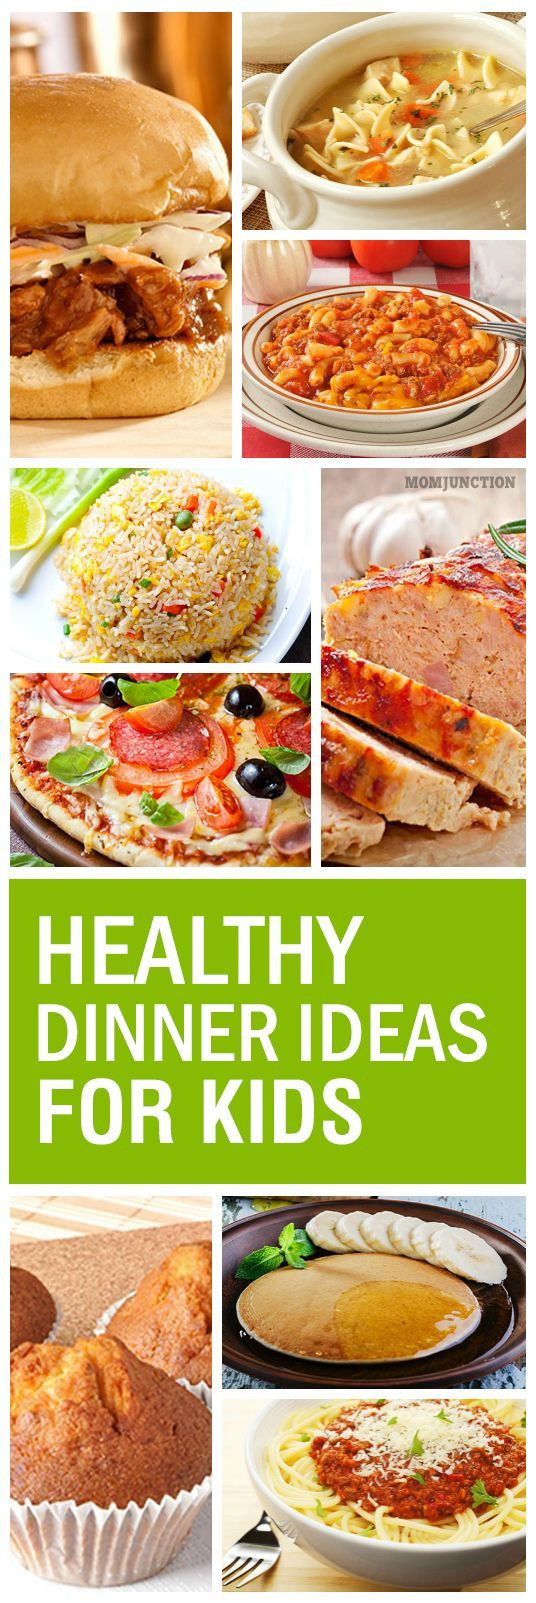 Quick Simple Healthy Dinners
 15 Quick And Yummy Dinner Recipes For Kids